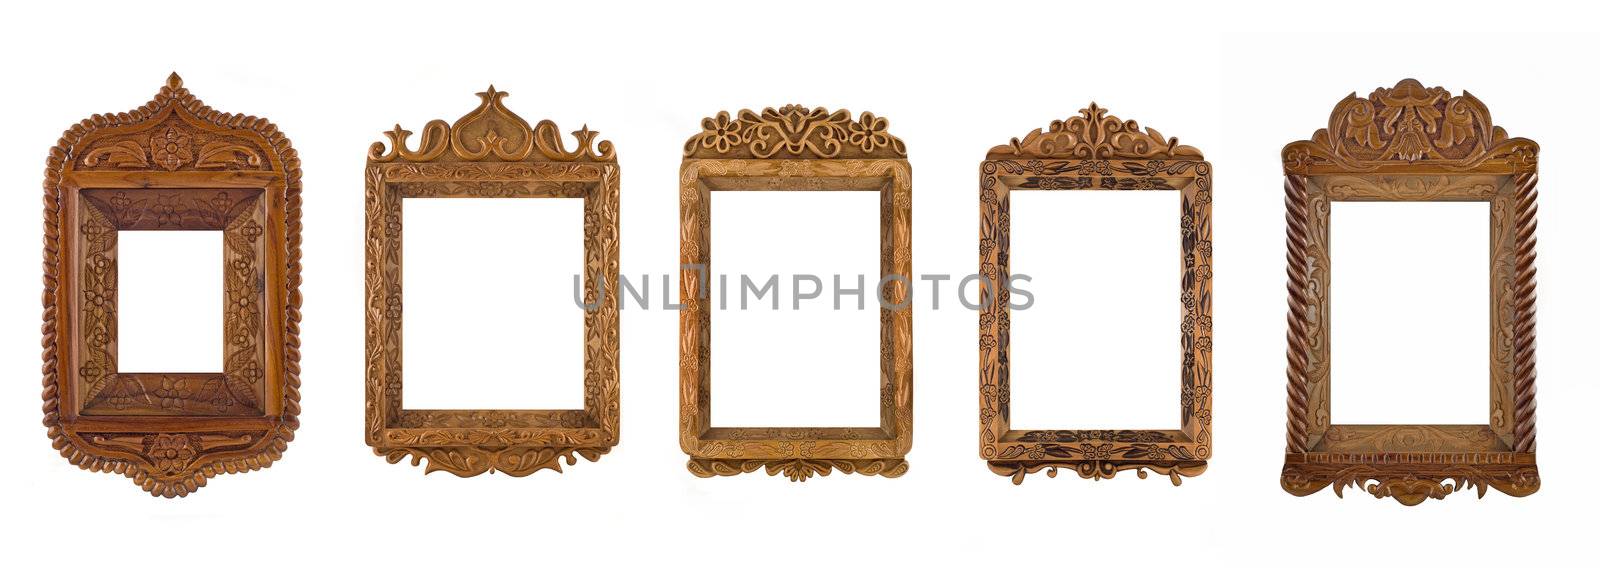 Collage of wooden carved Frames for picture or portrait over white